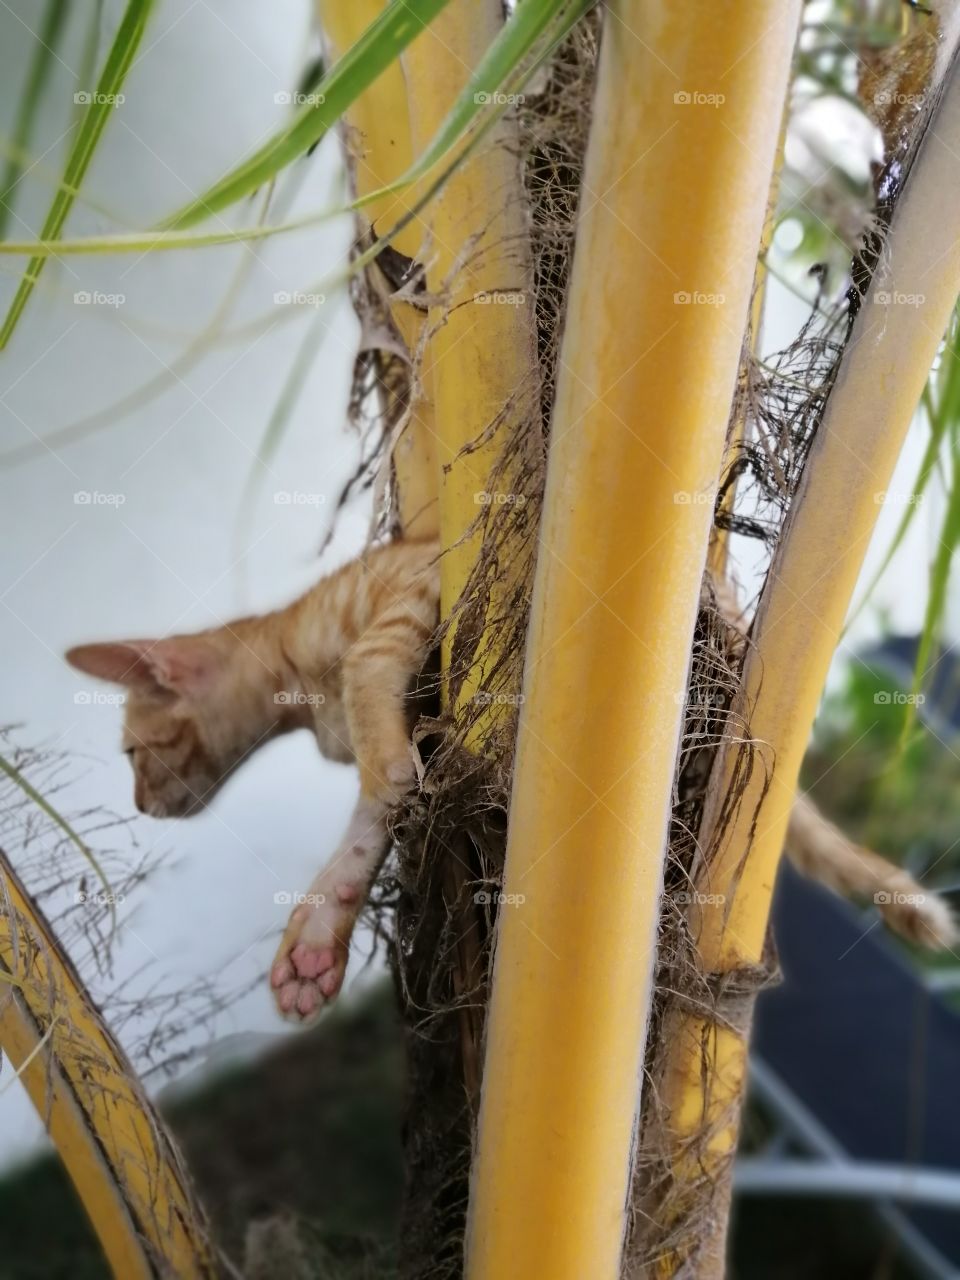 The little kitten is climbing on the coconut tree.
She wants to play going up and down.